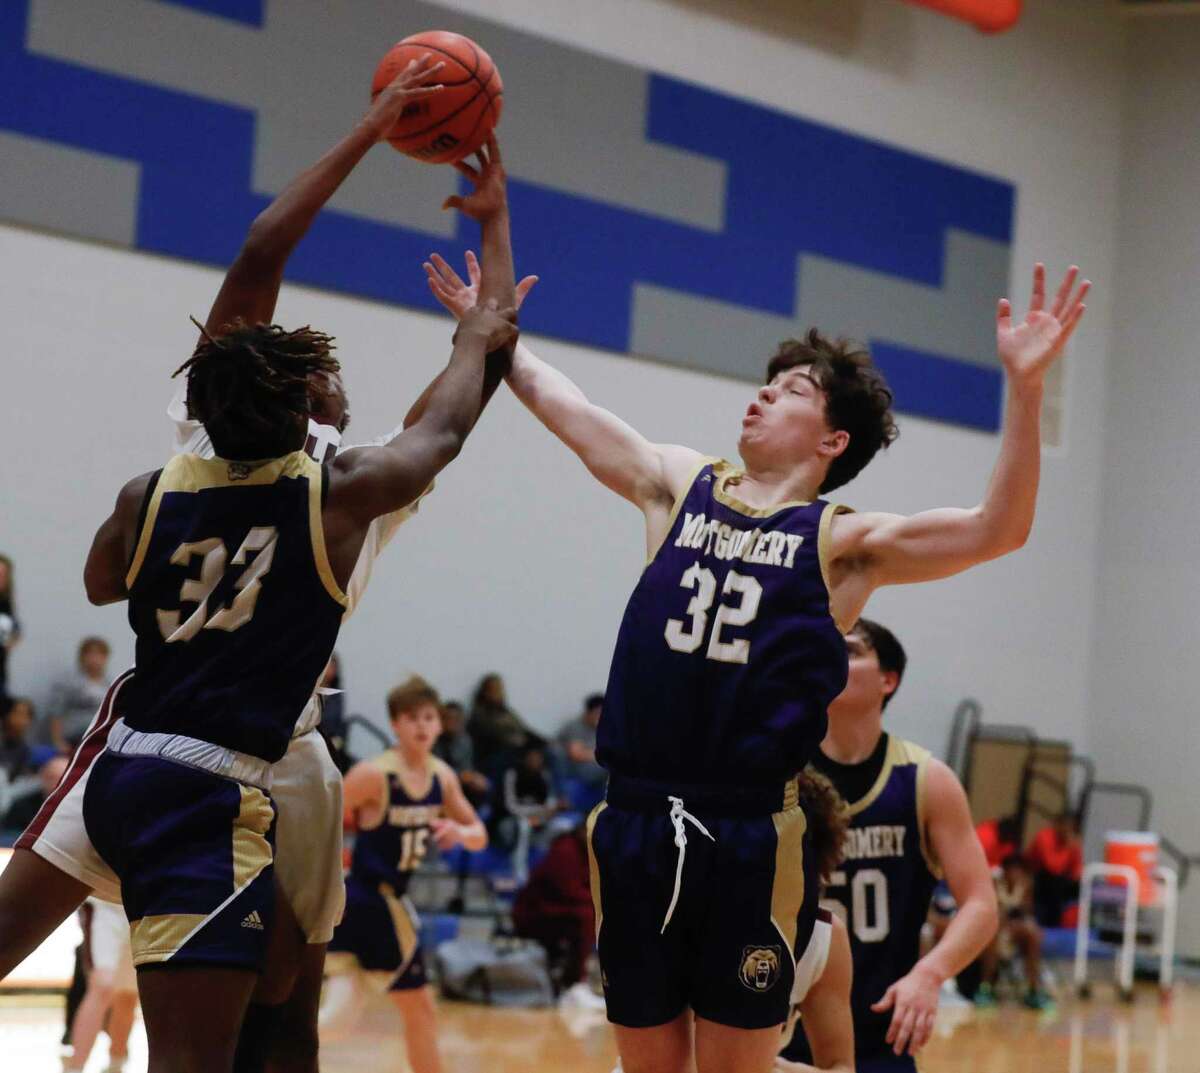 Montgomery small forward Blake Haneline (32) fights for a rebound during a game at the Beast Up Invitational at Grand Oaks High School, Thursday, Dec. 2 2021, in Spring.